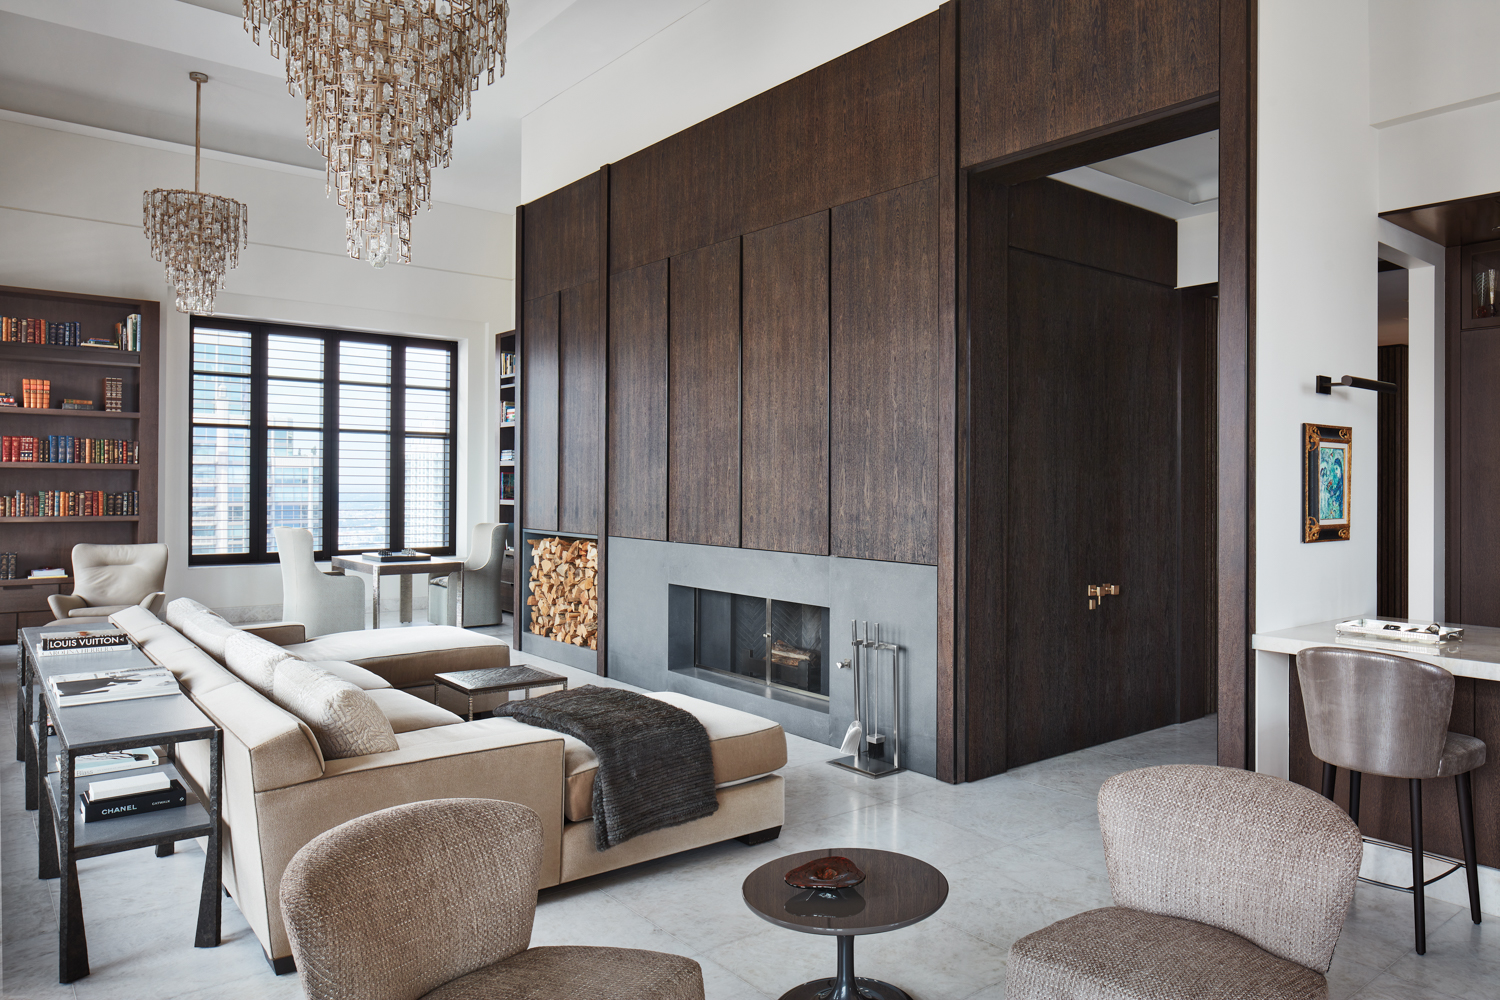 This Penthouse May Just House The Highest Fireplace In Chicago